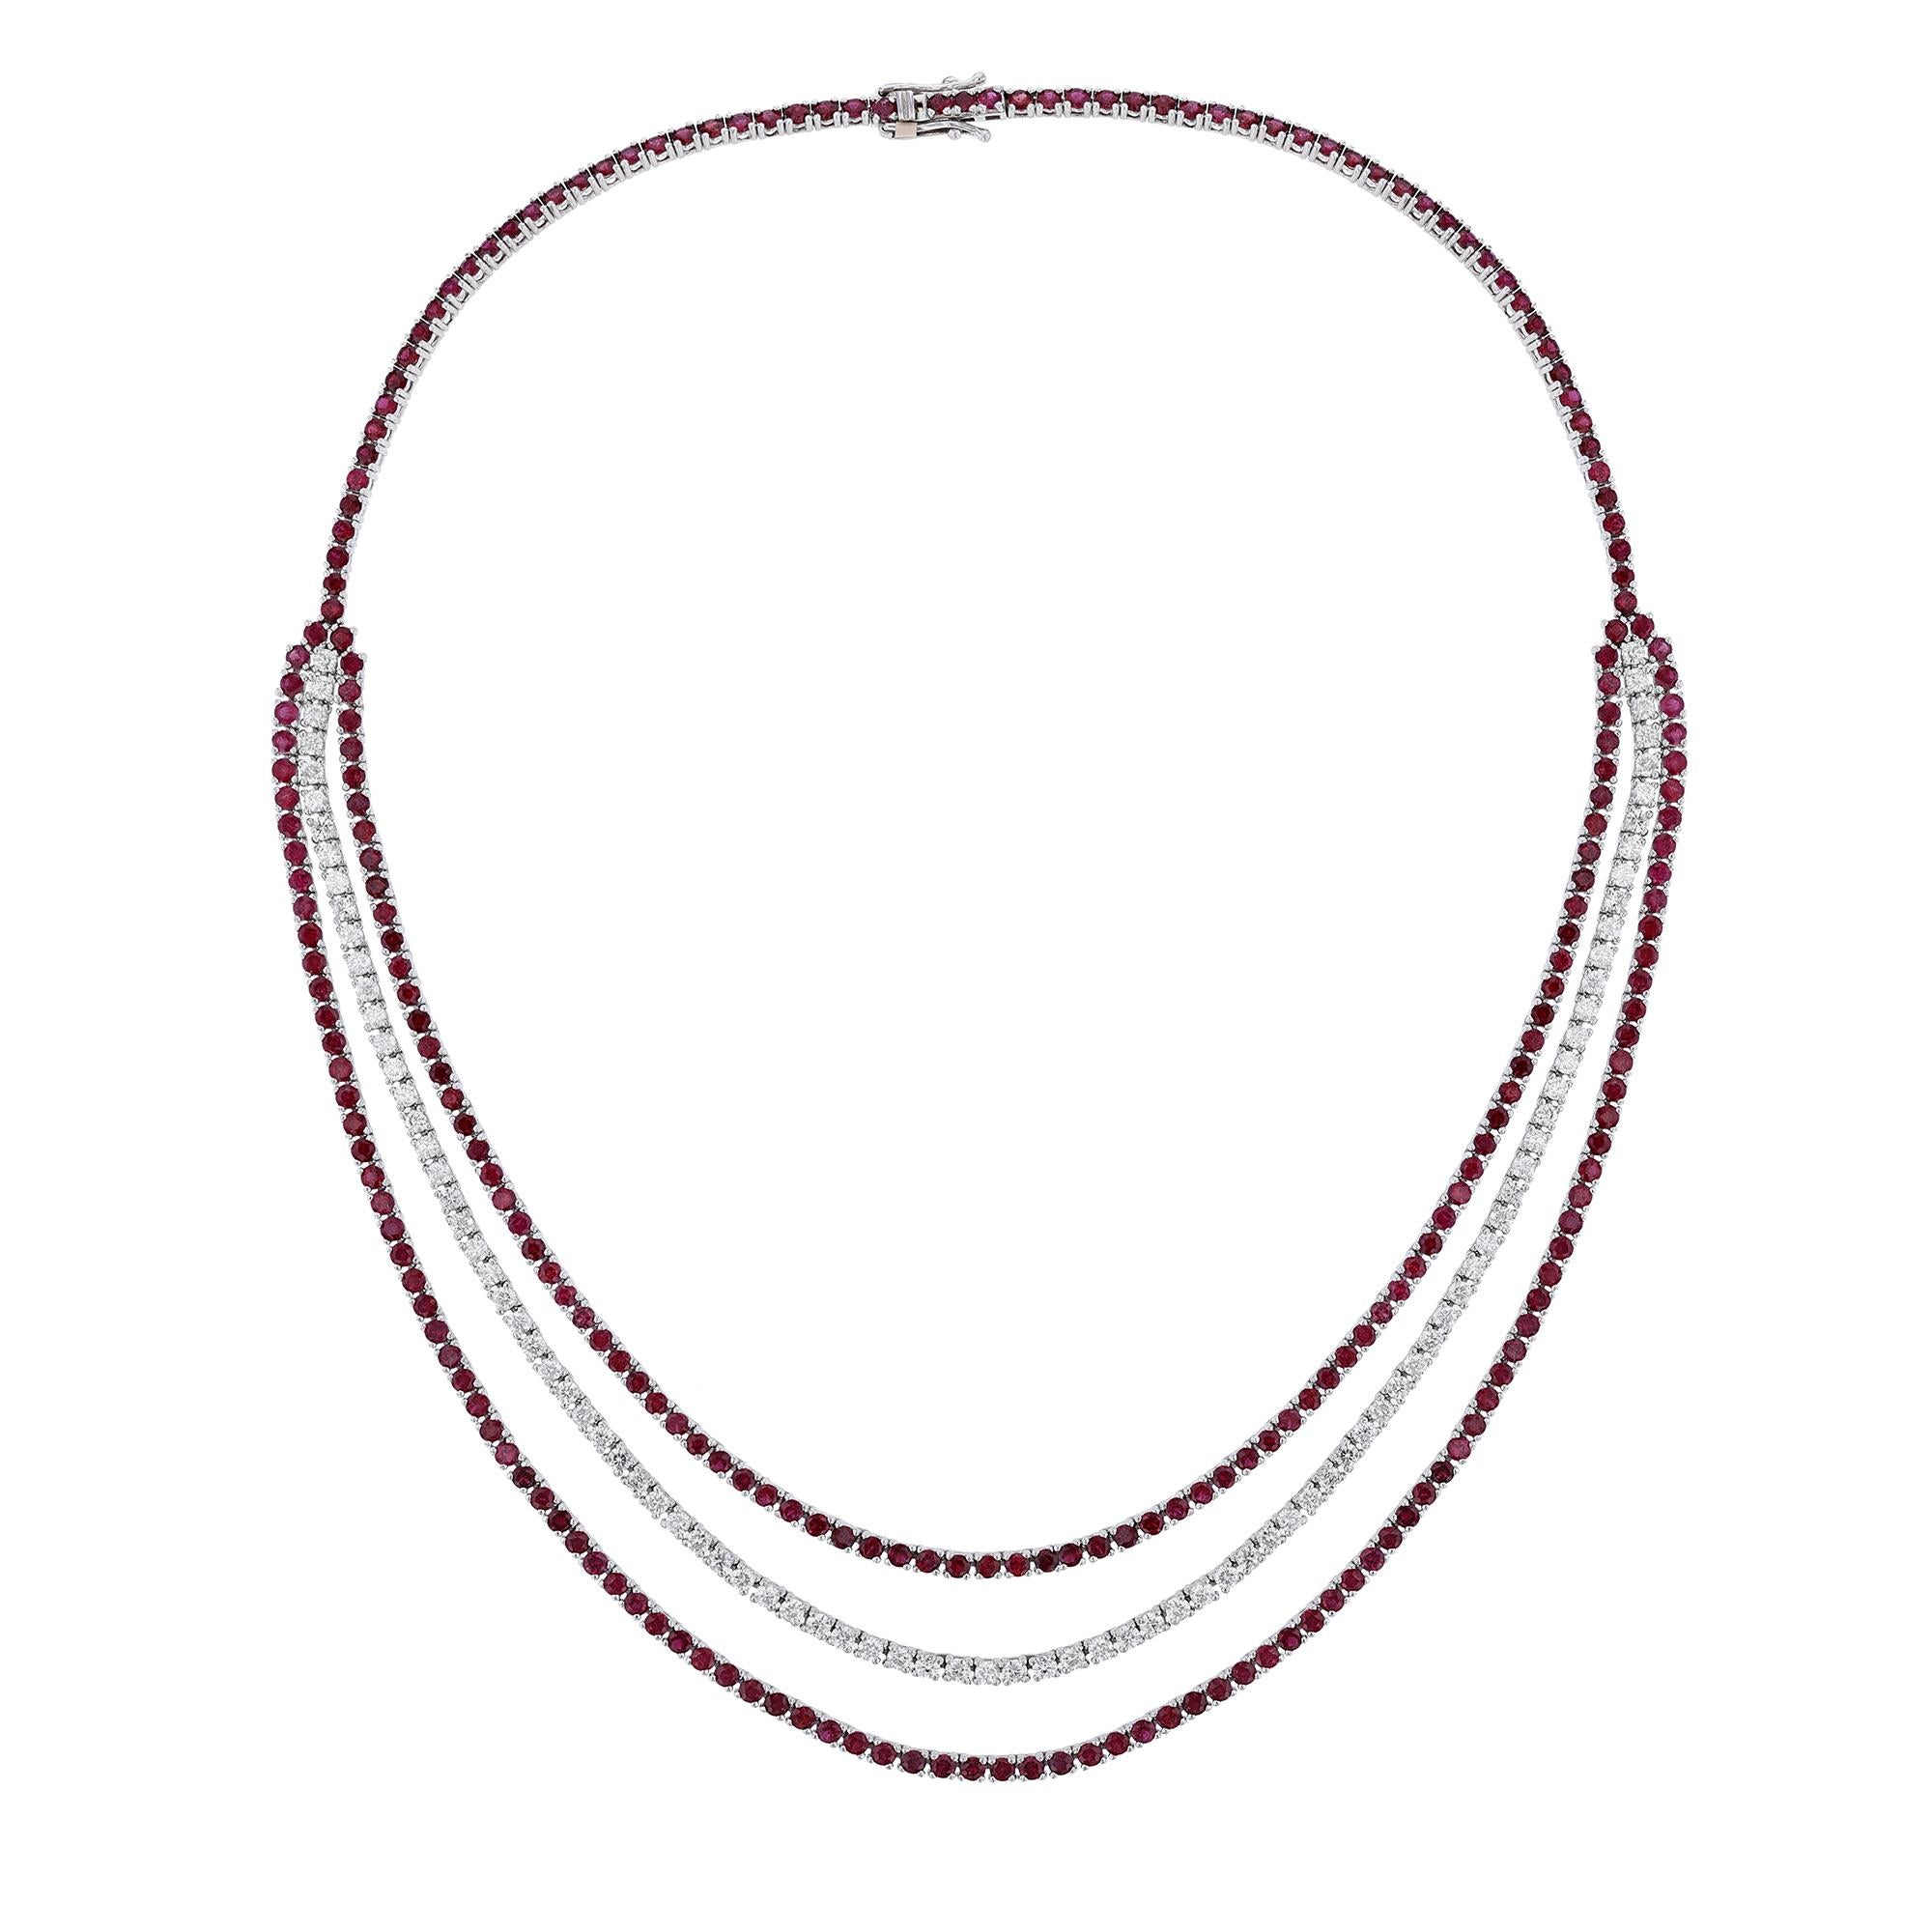 This necklace is made in 14K white gold. It features 263 rubies weighing 17.61 carats. As well as 92 diamonds 4.98 carats. Necklace has a color grade (H). and clarity grade (SI2). All stones are prong set